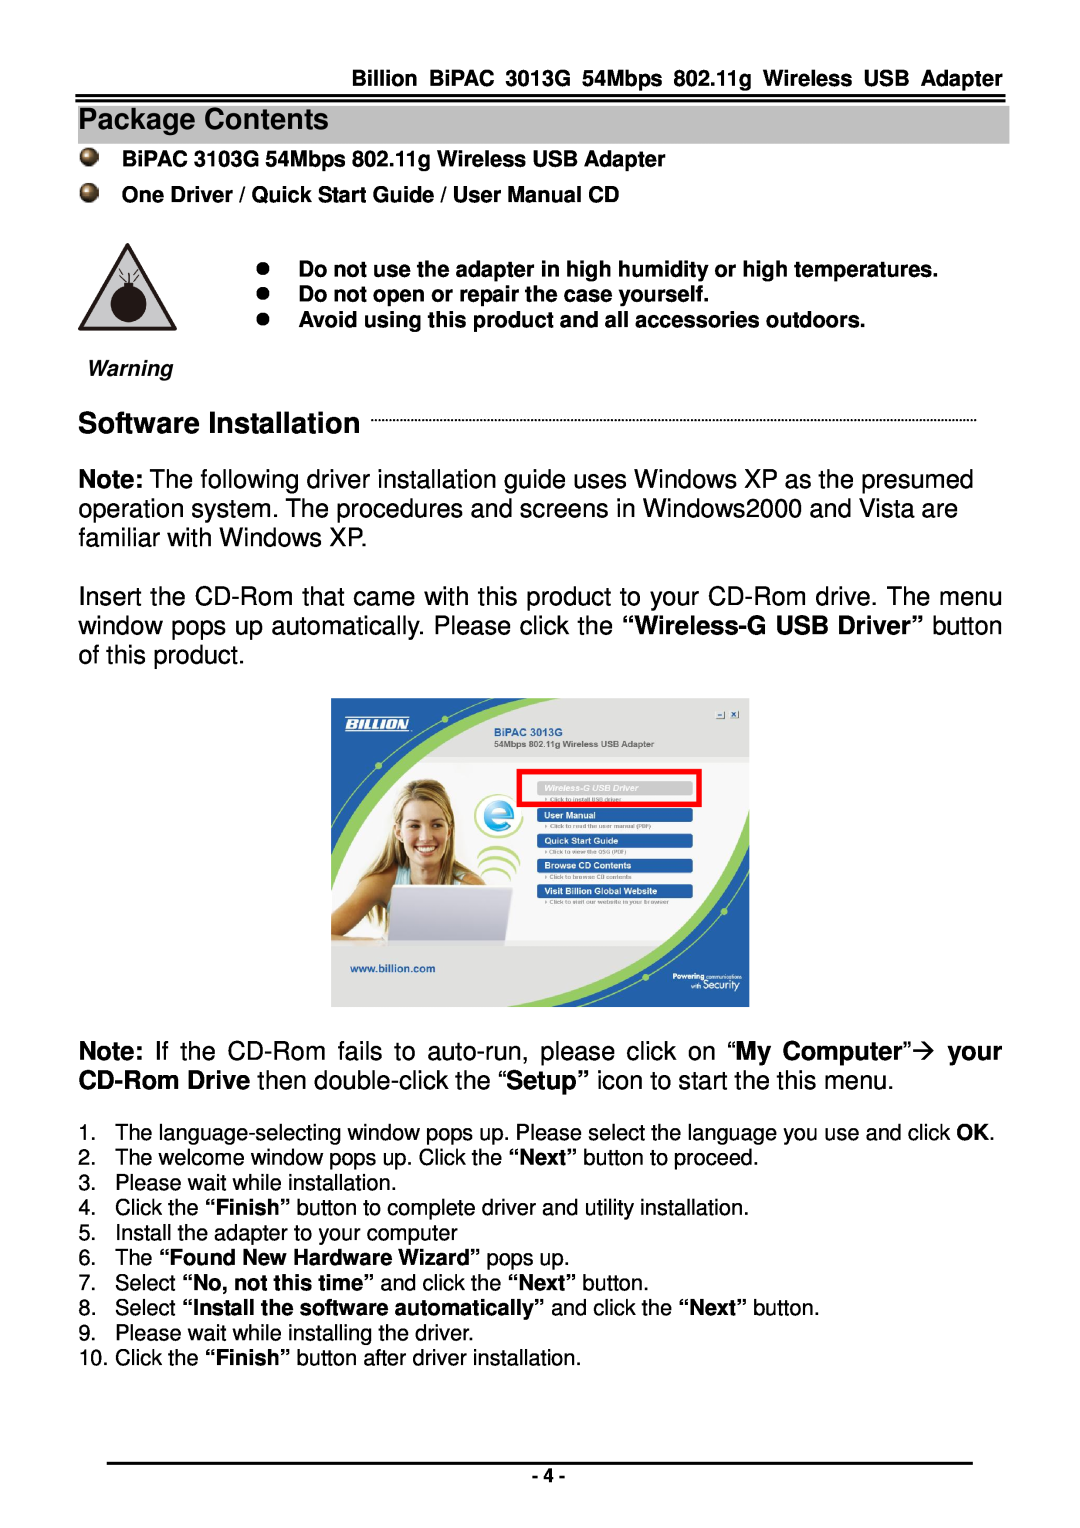 Billion Electric Company 3013G quick start Package Contents, Software Installation 